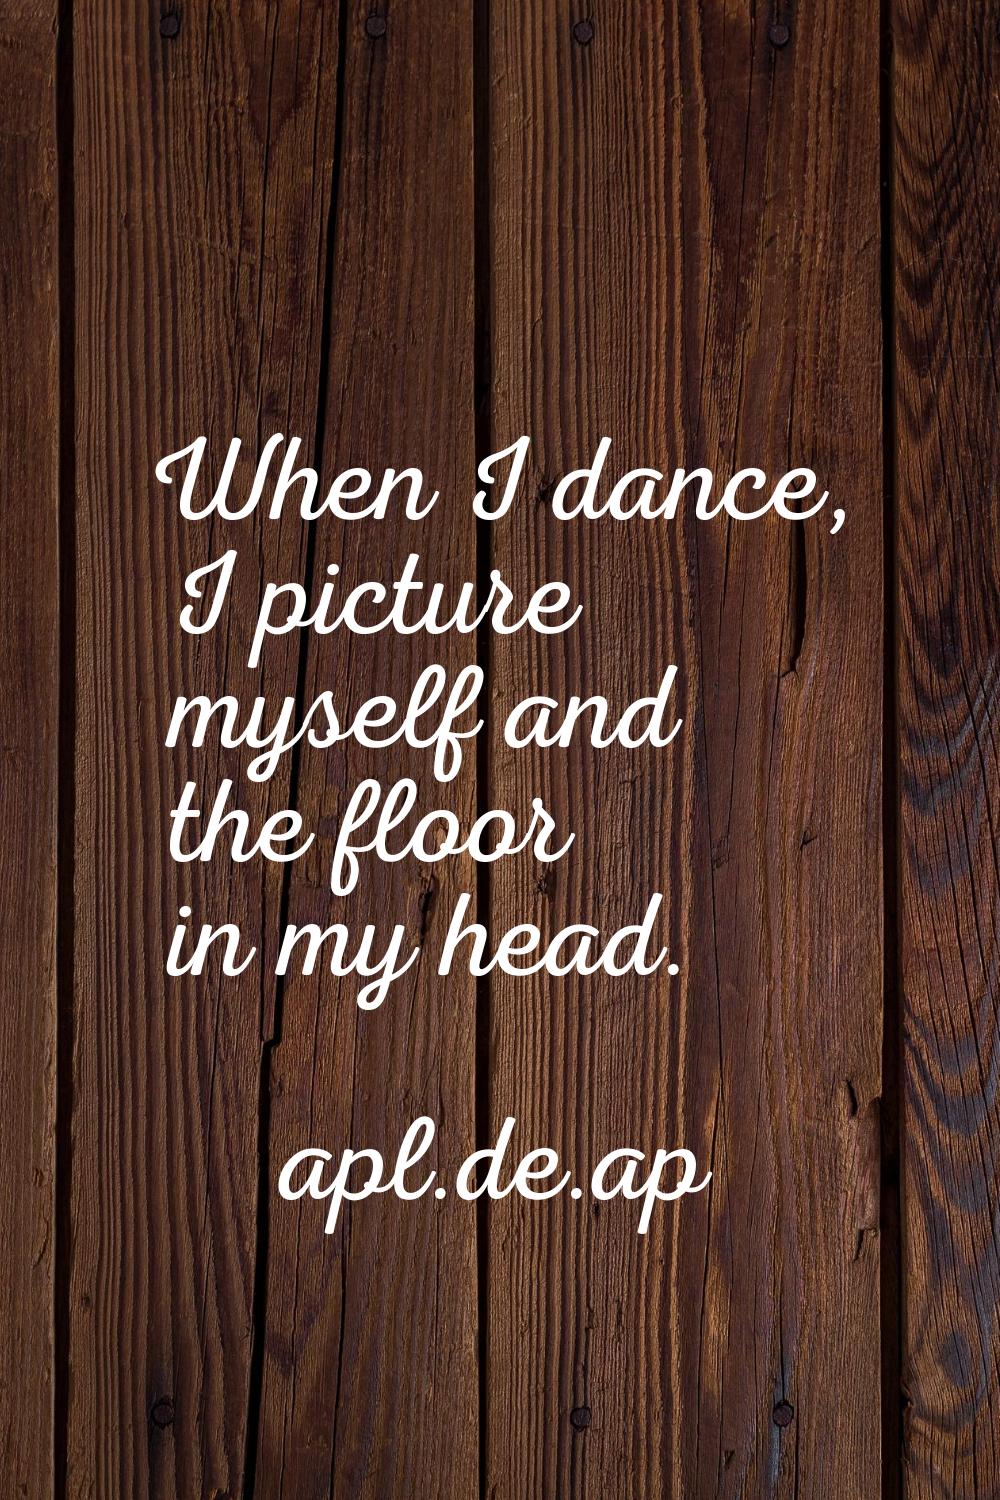 When I dance, I picture myself and the floor in my head.